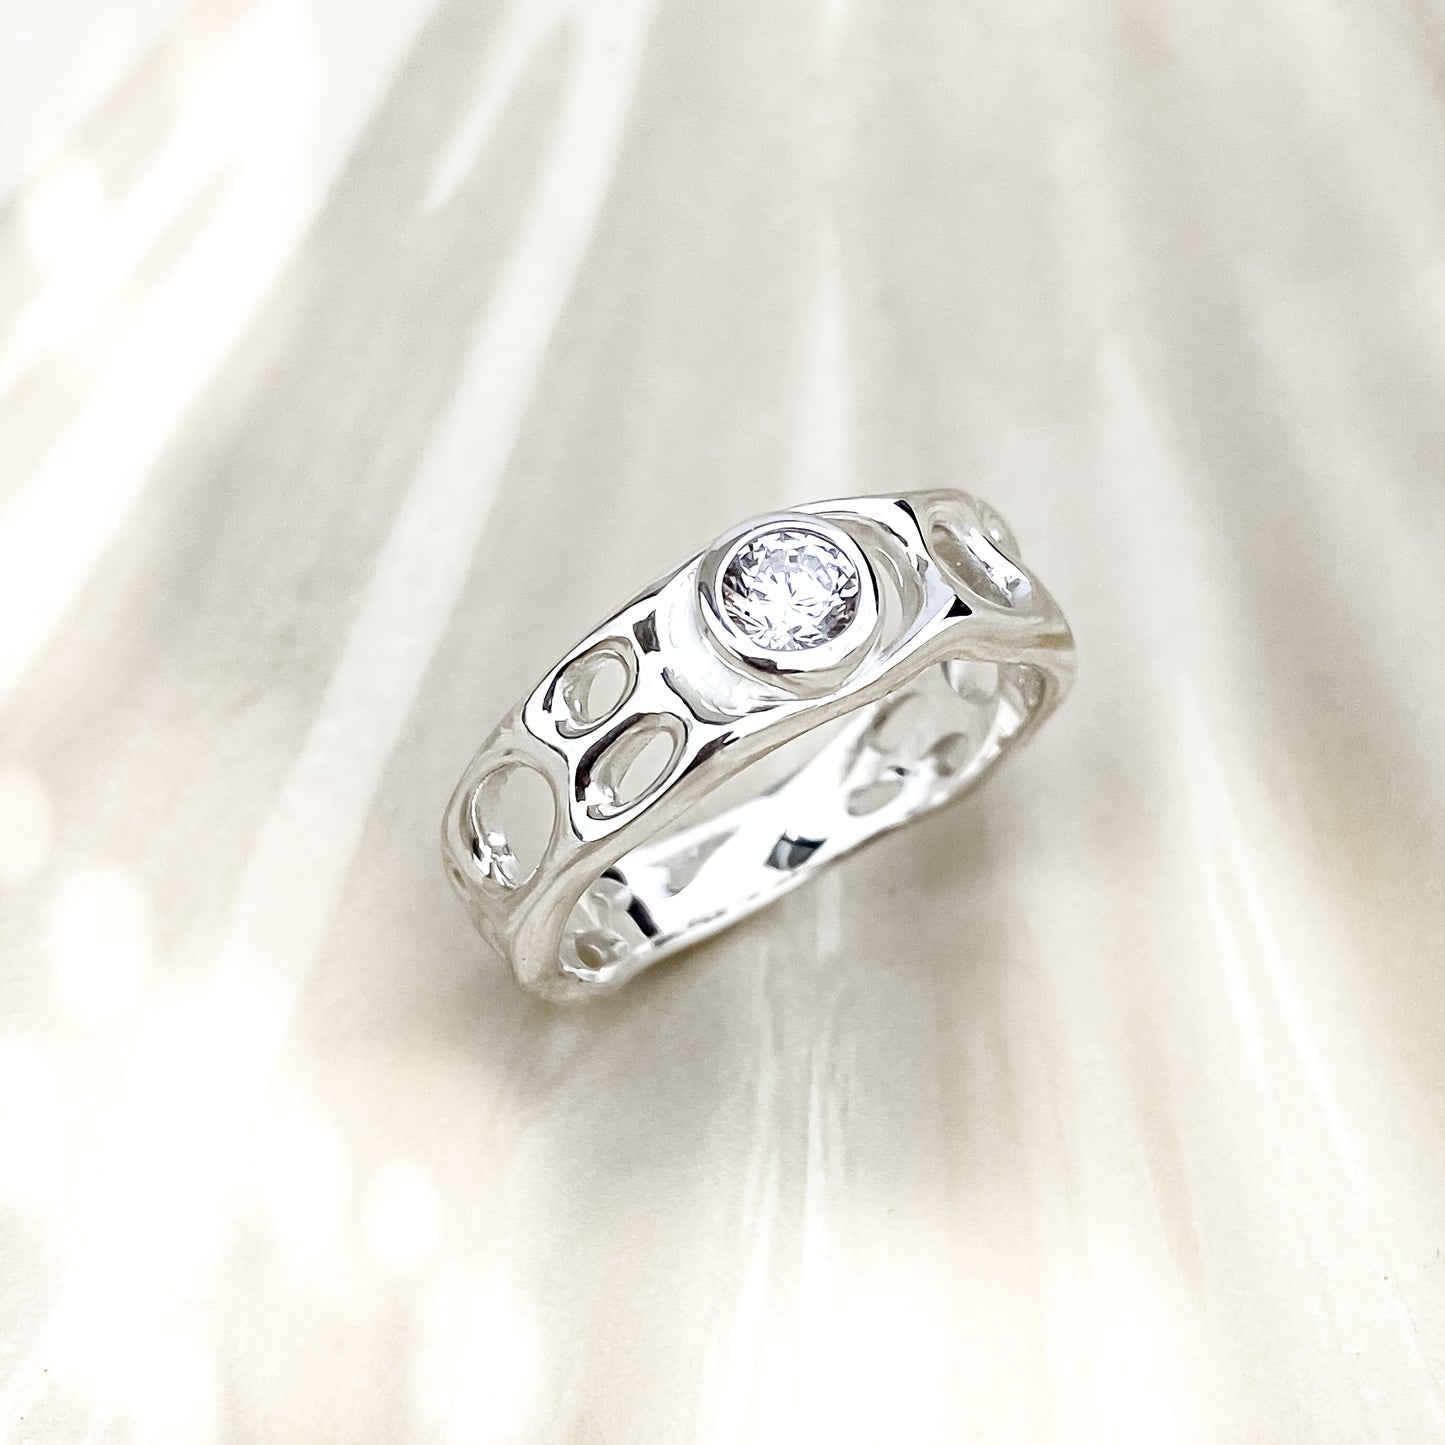 Sterling Silver Infinity Ring with White Topaz